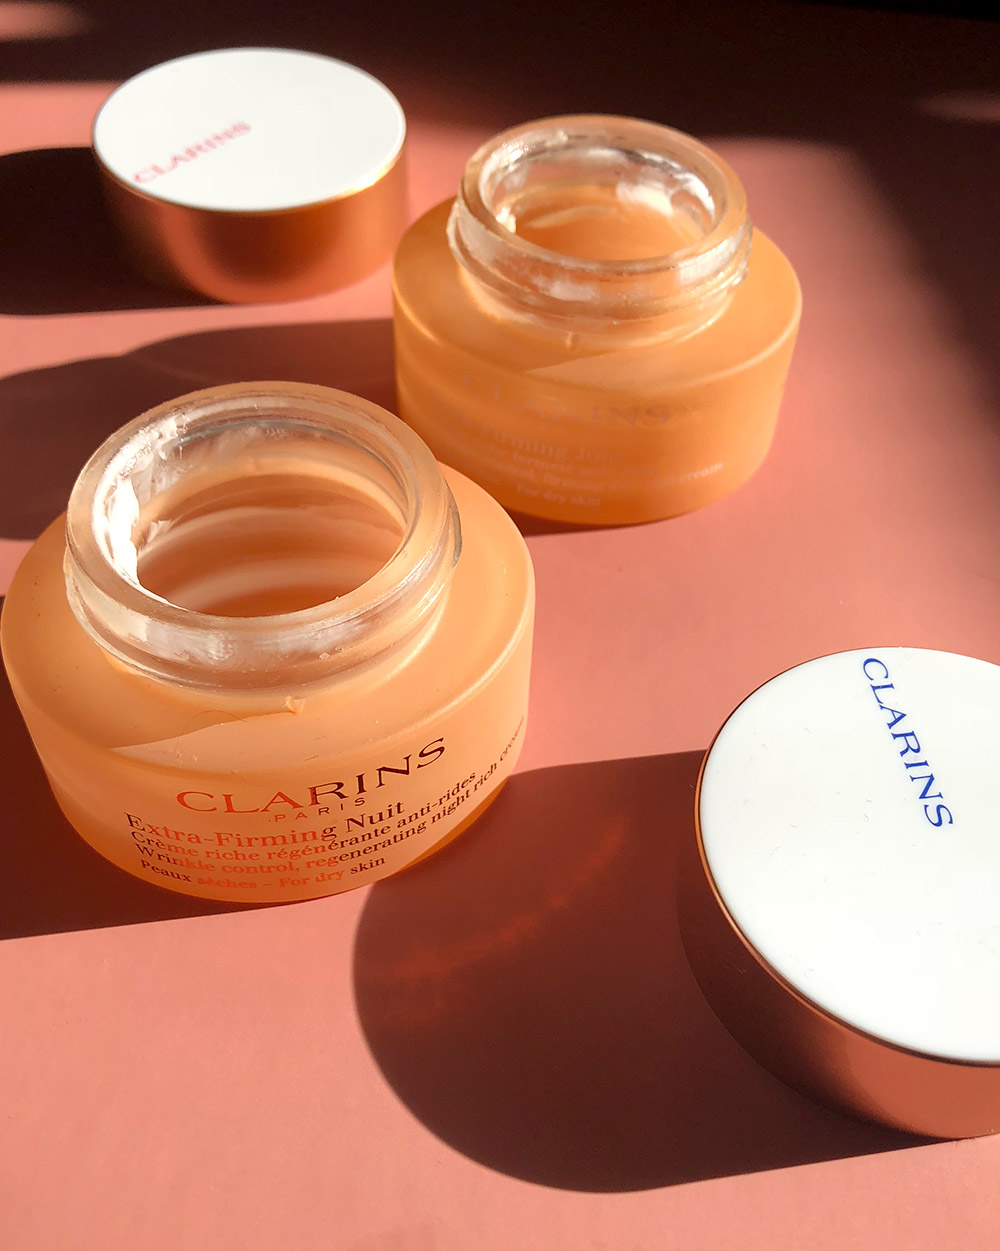 clarins extra firming